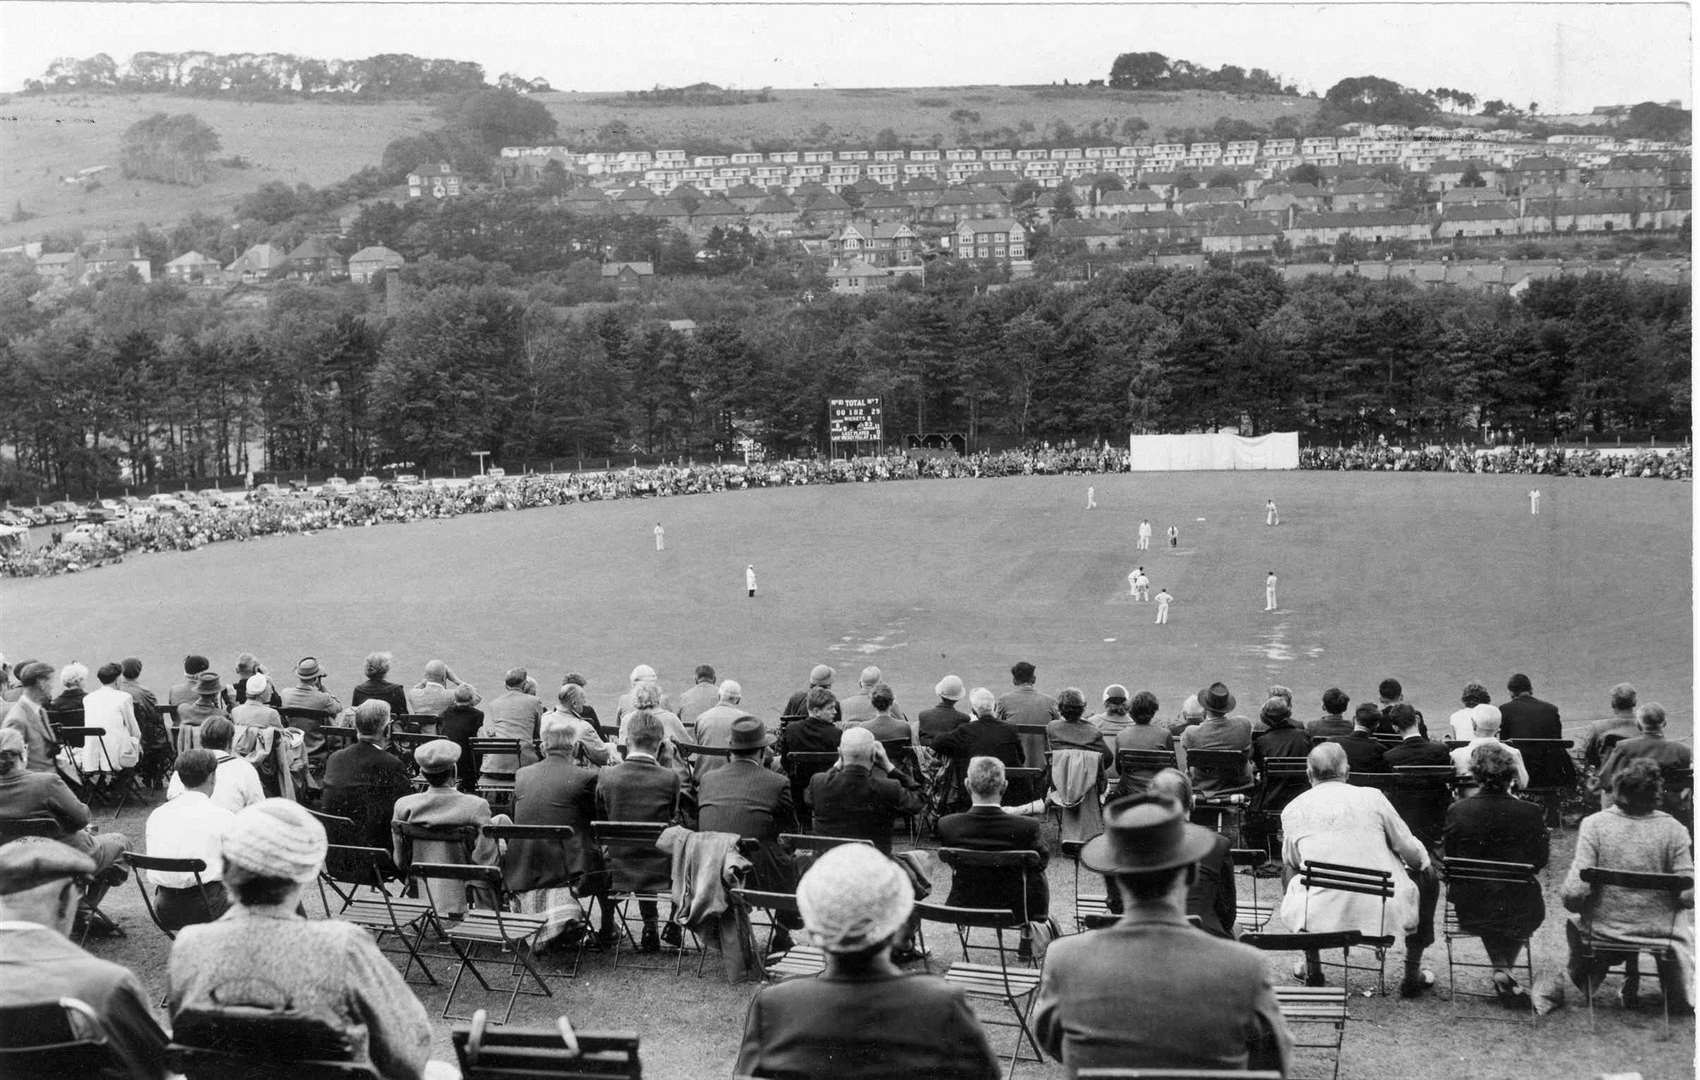 Cricket at Crabble ground in Dover in 1957. The ground hosted more than 100 first-class games. Picture supplied by Lambert Weston (Dover)/Ray Warner